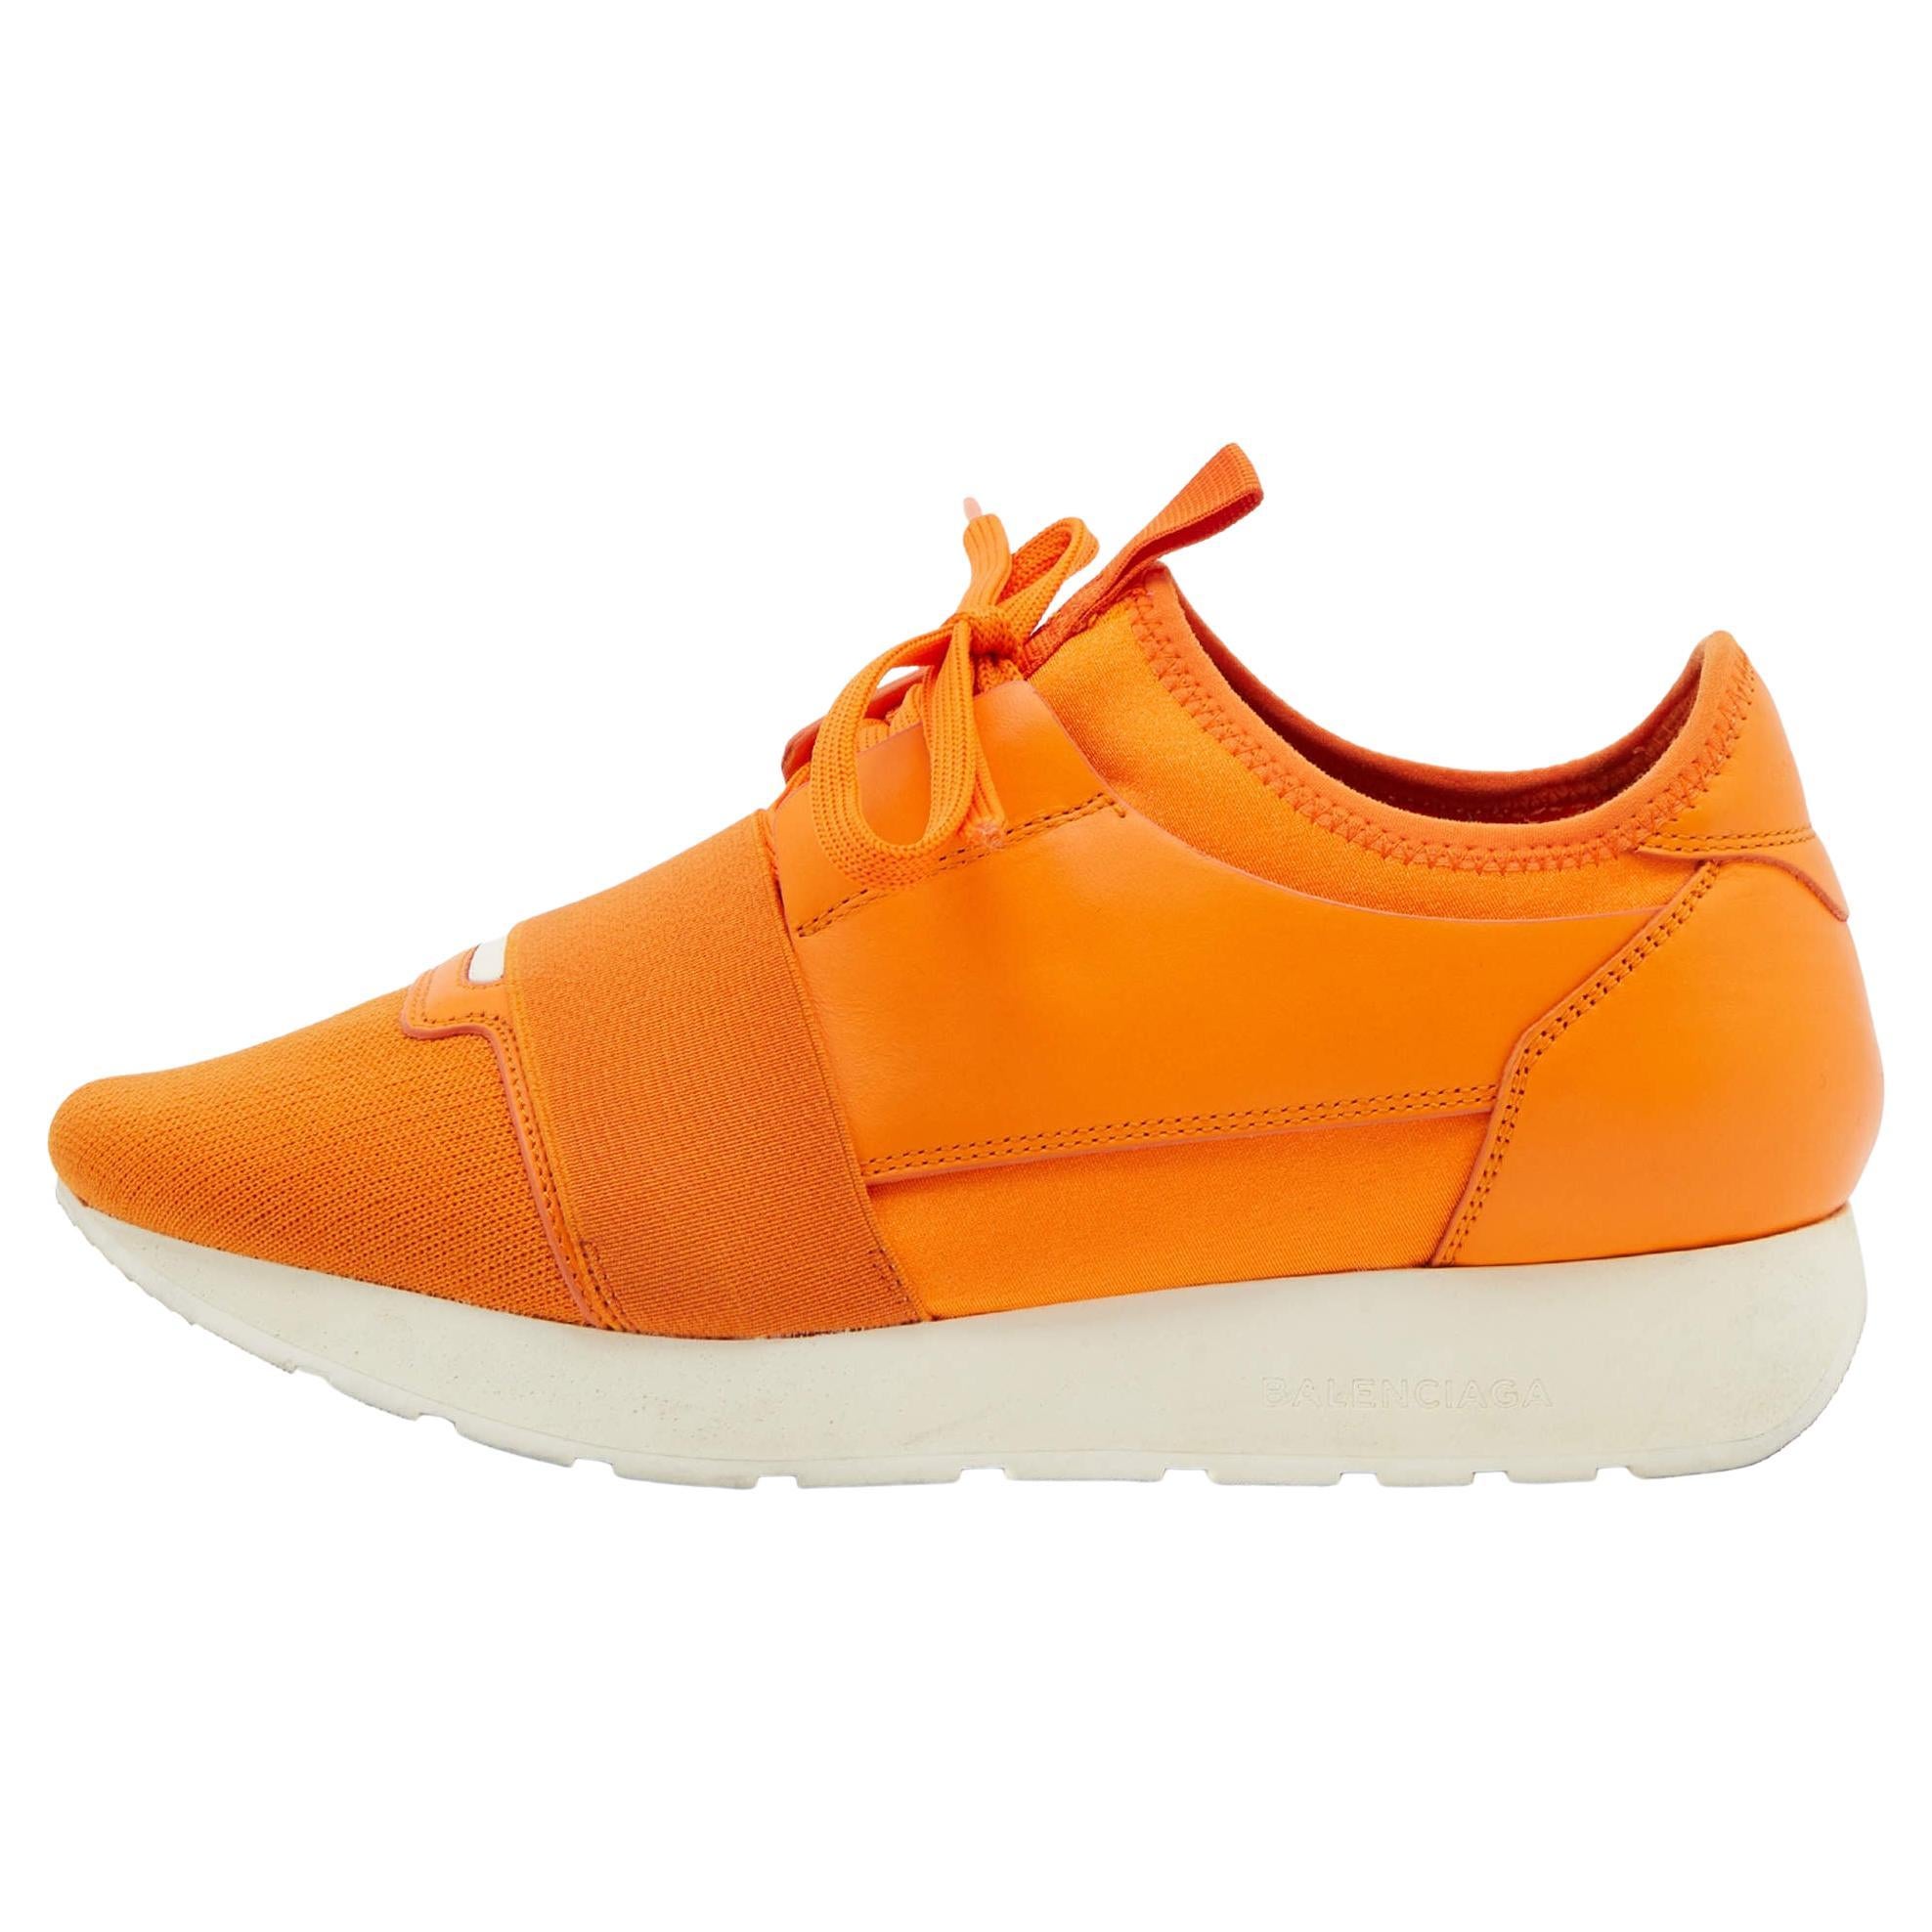 Balenciaga Orange Leather and Mesh Race Runner Sneakers Size 38 For Sale